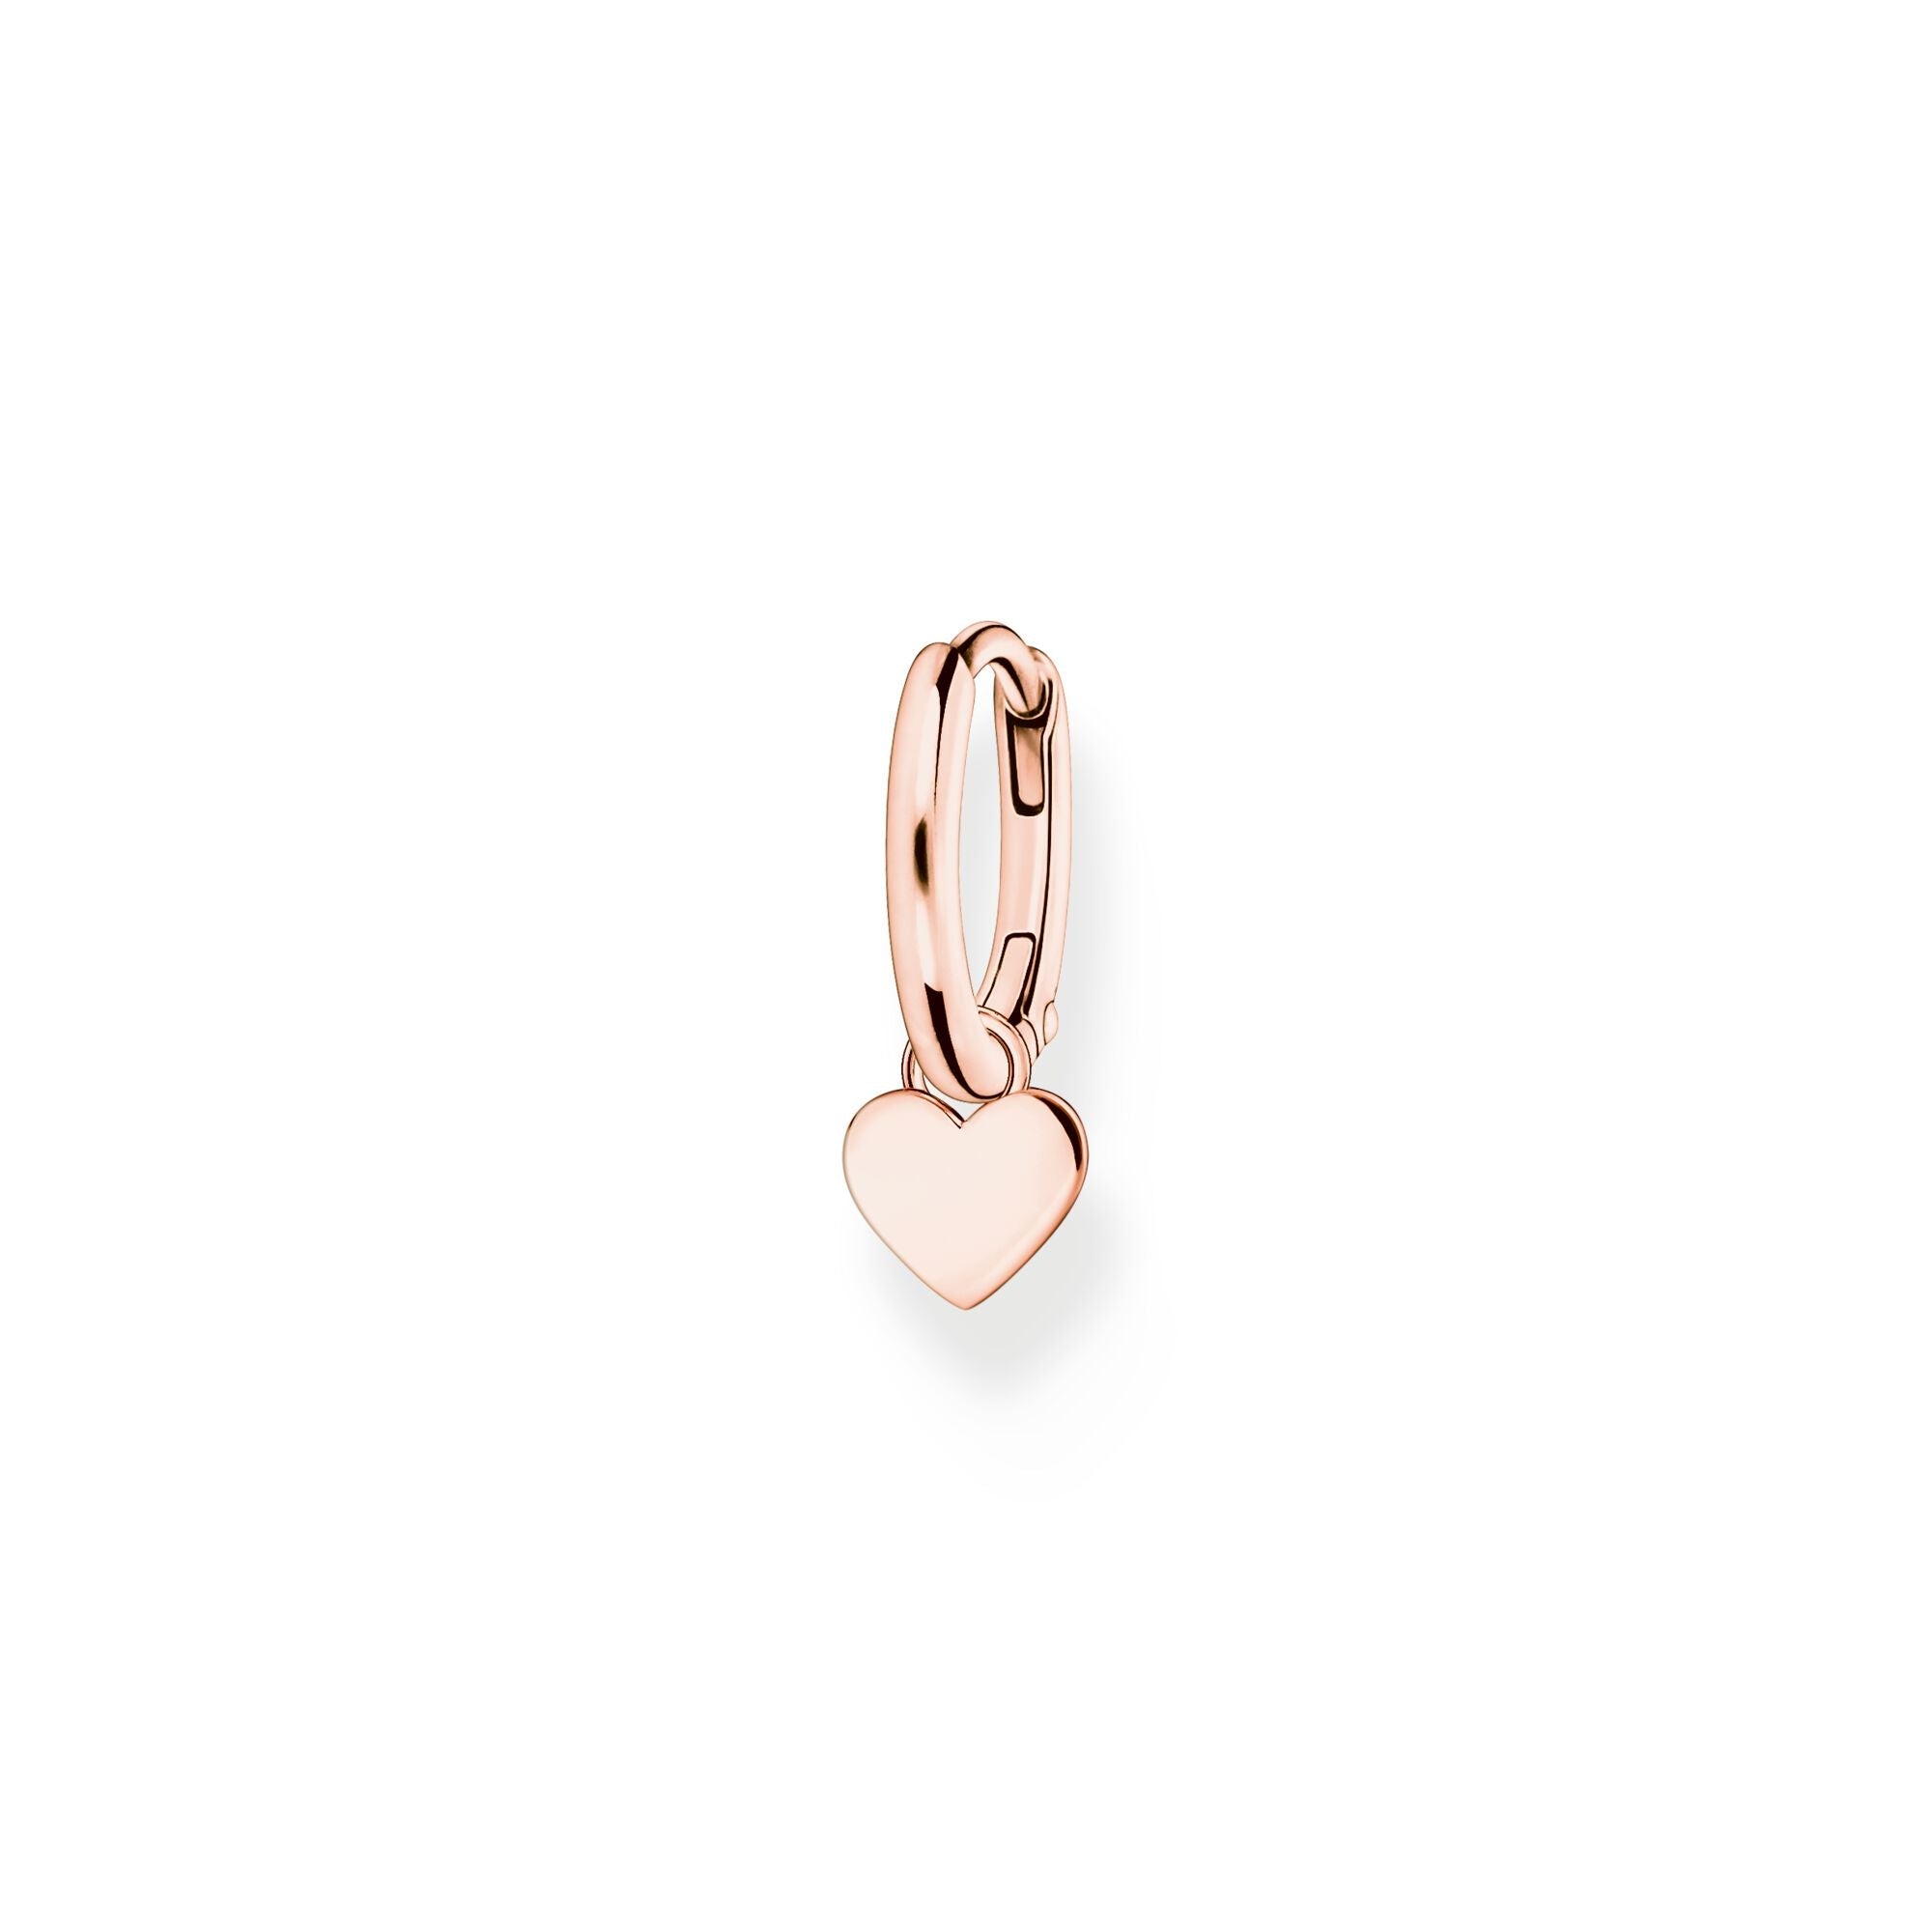 Single Hoop Earring With Heart Pendant Rose Gold Rose Gold Thomas Sabo